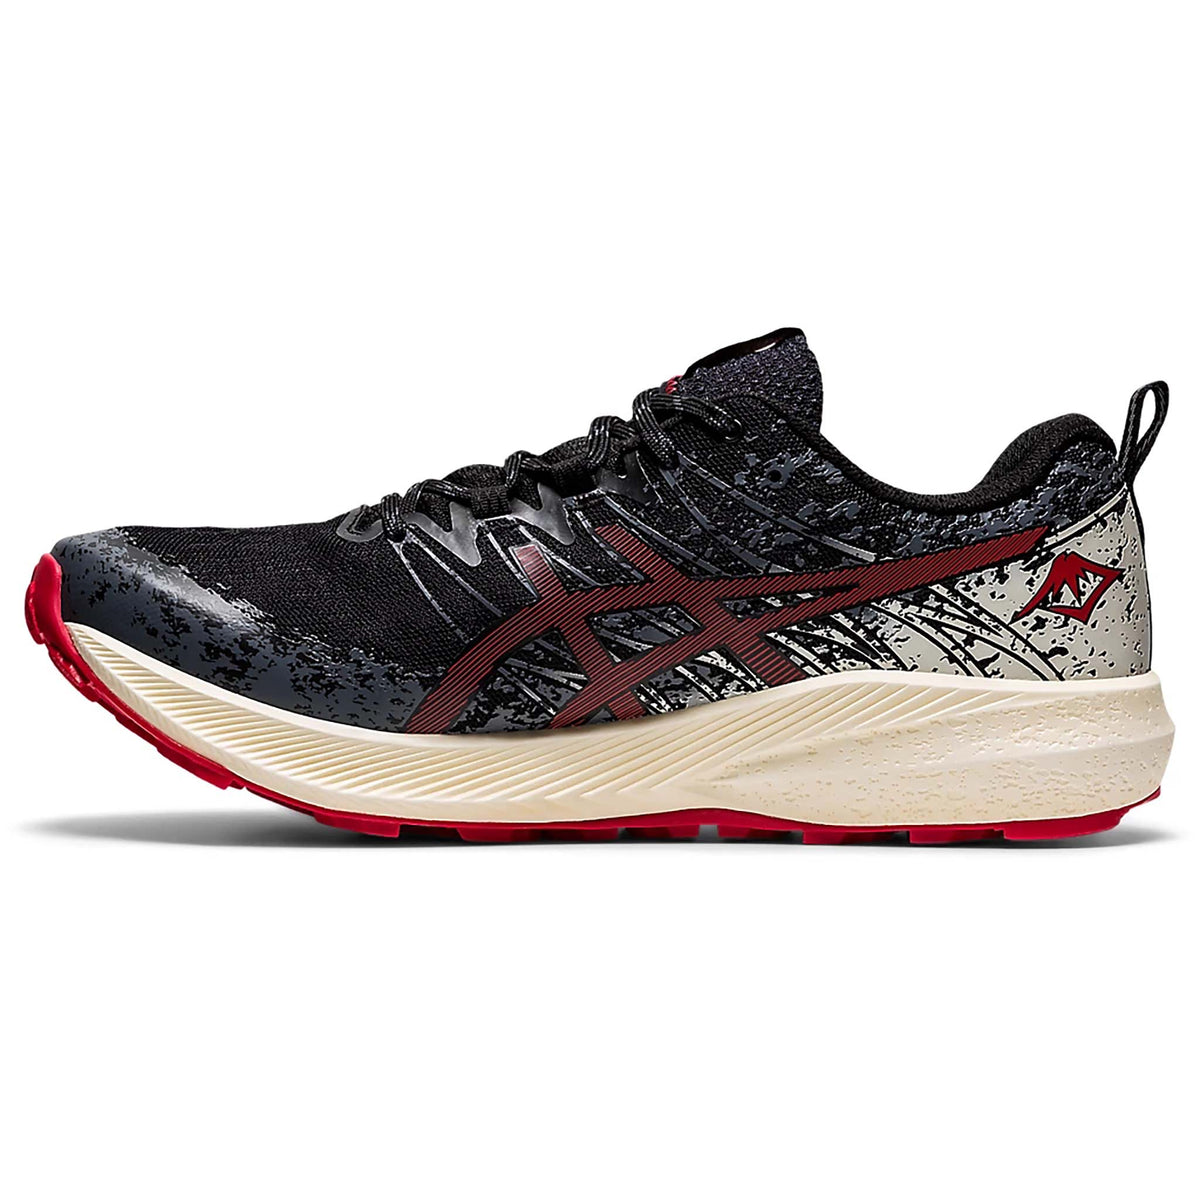 ASICS Fuji Lite 2 running homme rouge electrique lateral